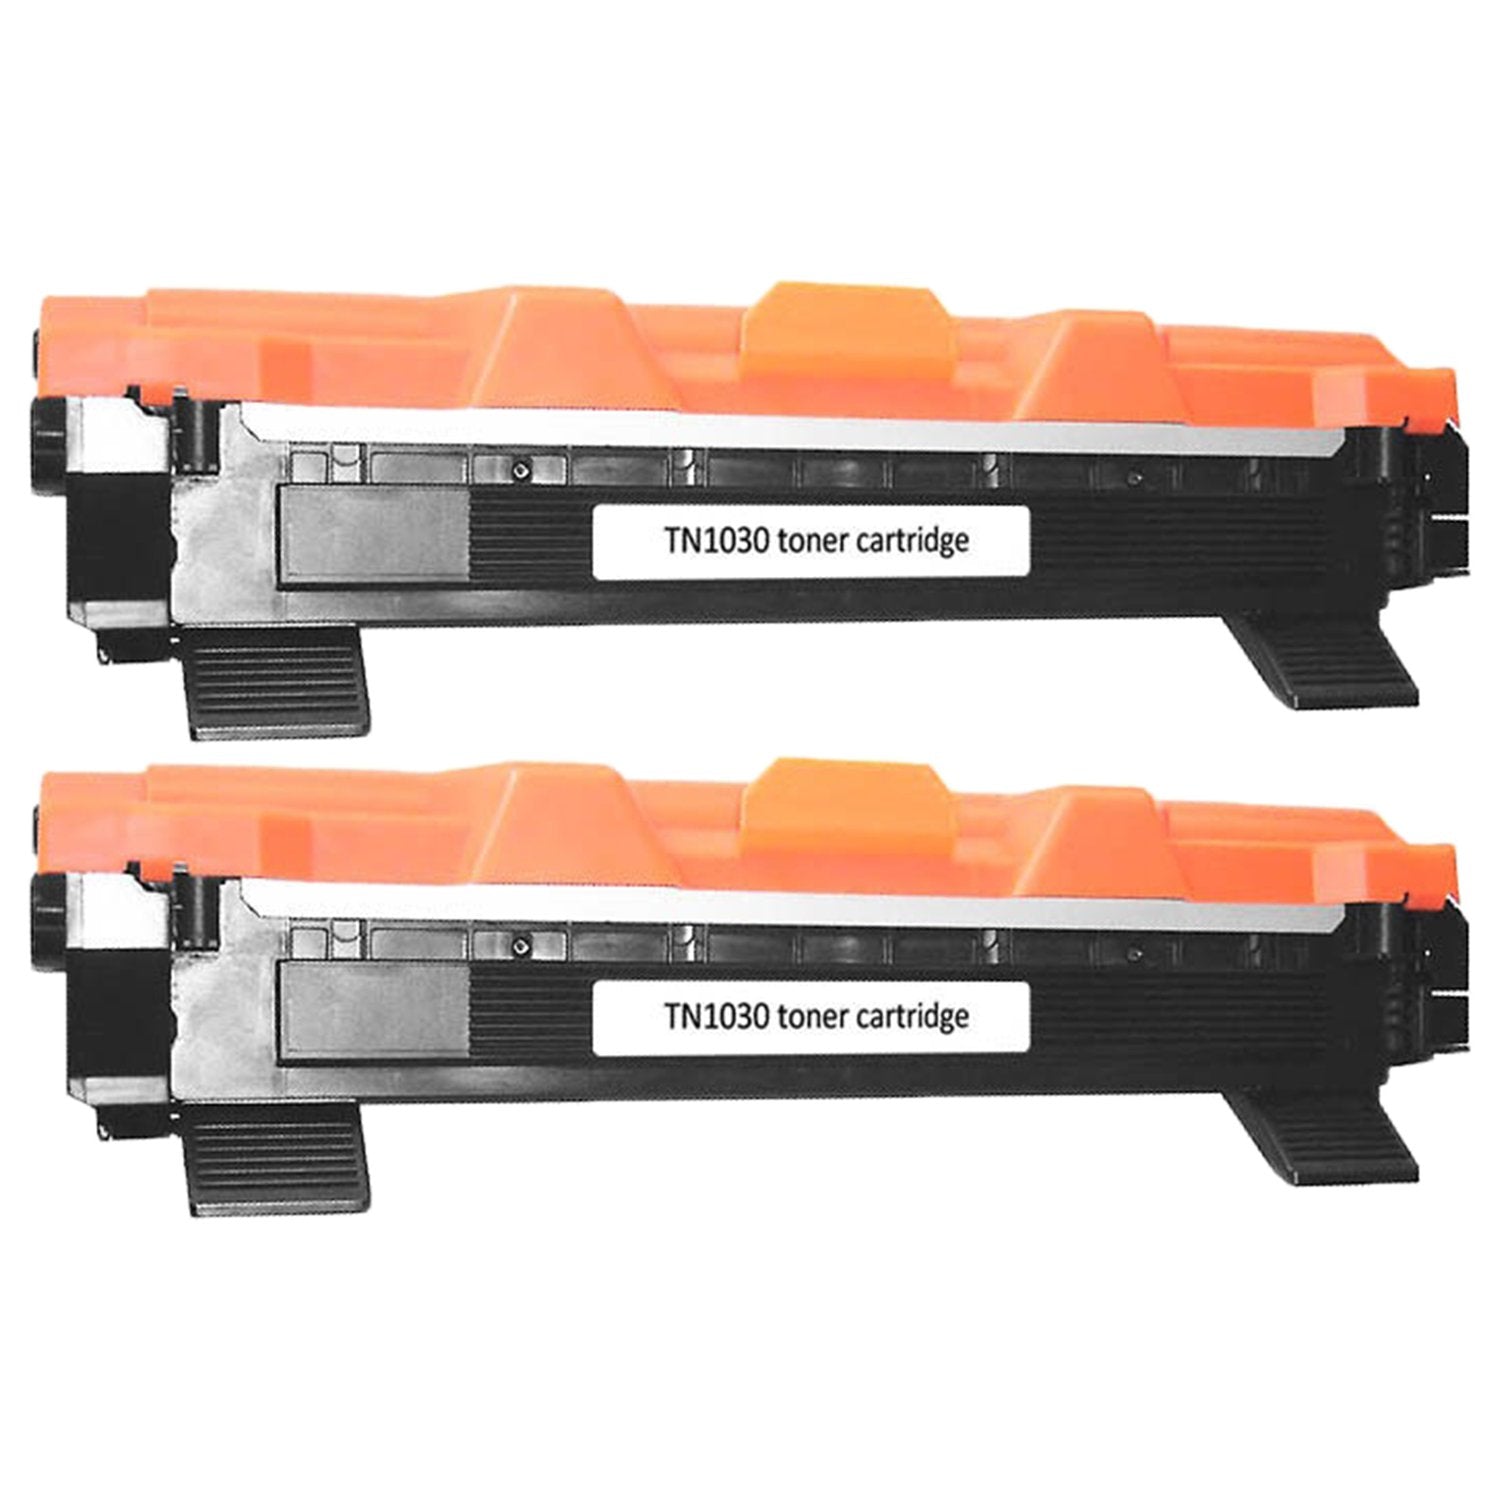 Absolute Toner Compatible Brother TN1030 Black Toner Cartridge | Absolute Toner Brother Toner Cartridges